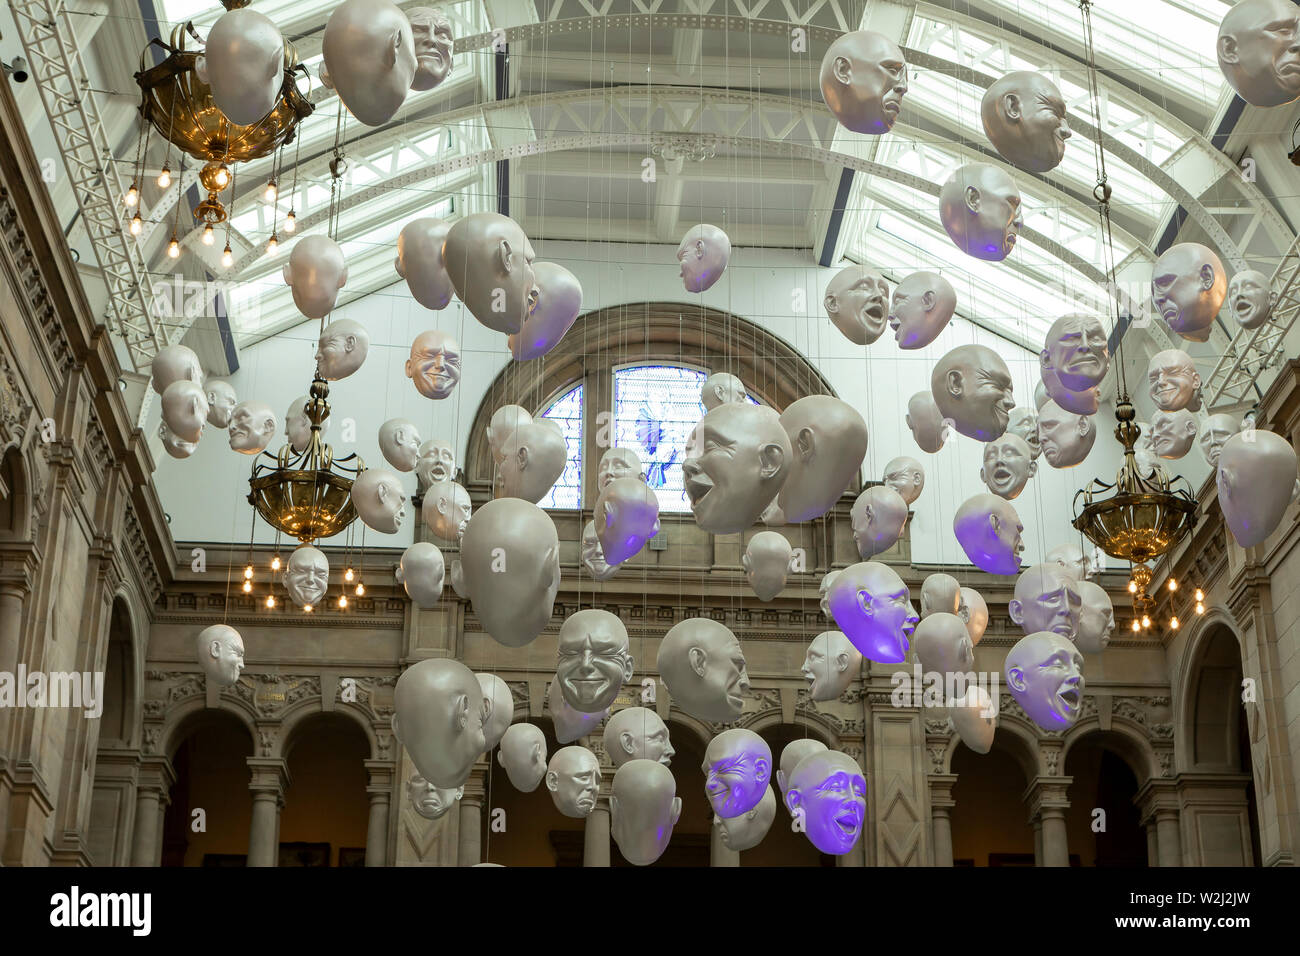 Kelvingrove Art Gallery and Museum Banque D'Images